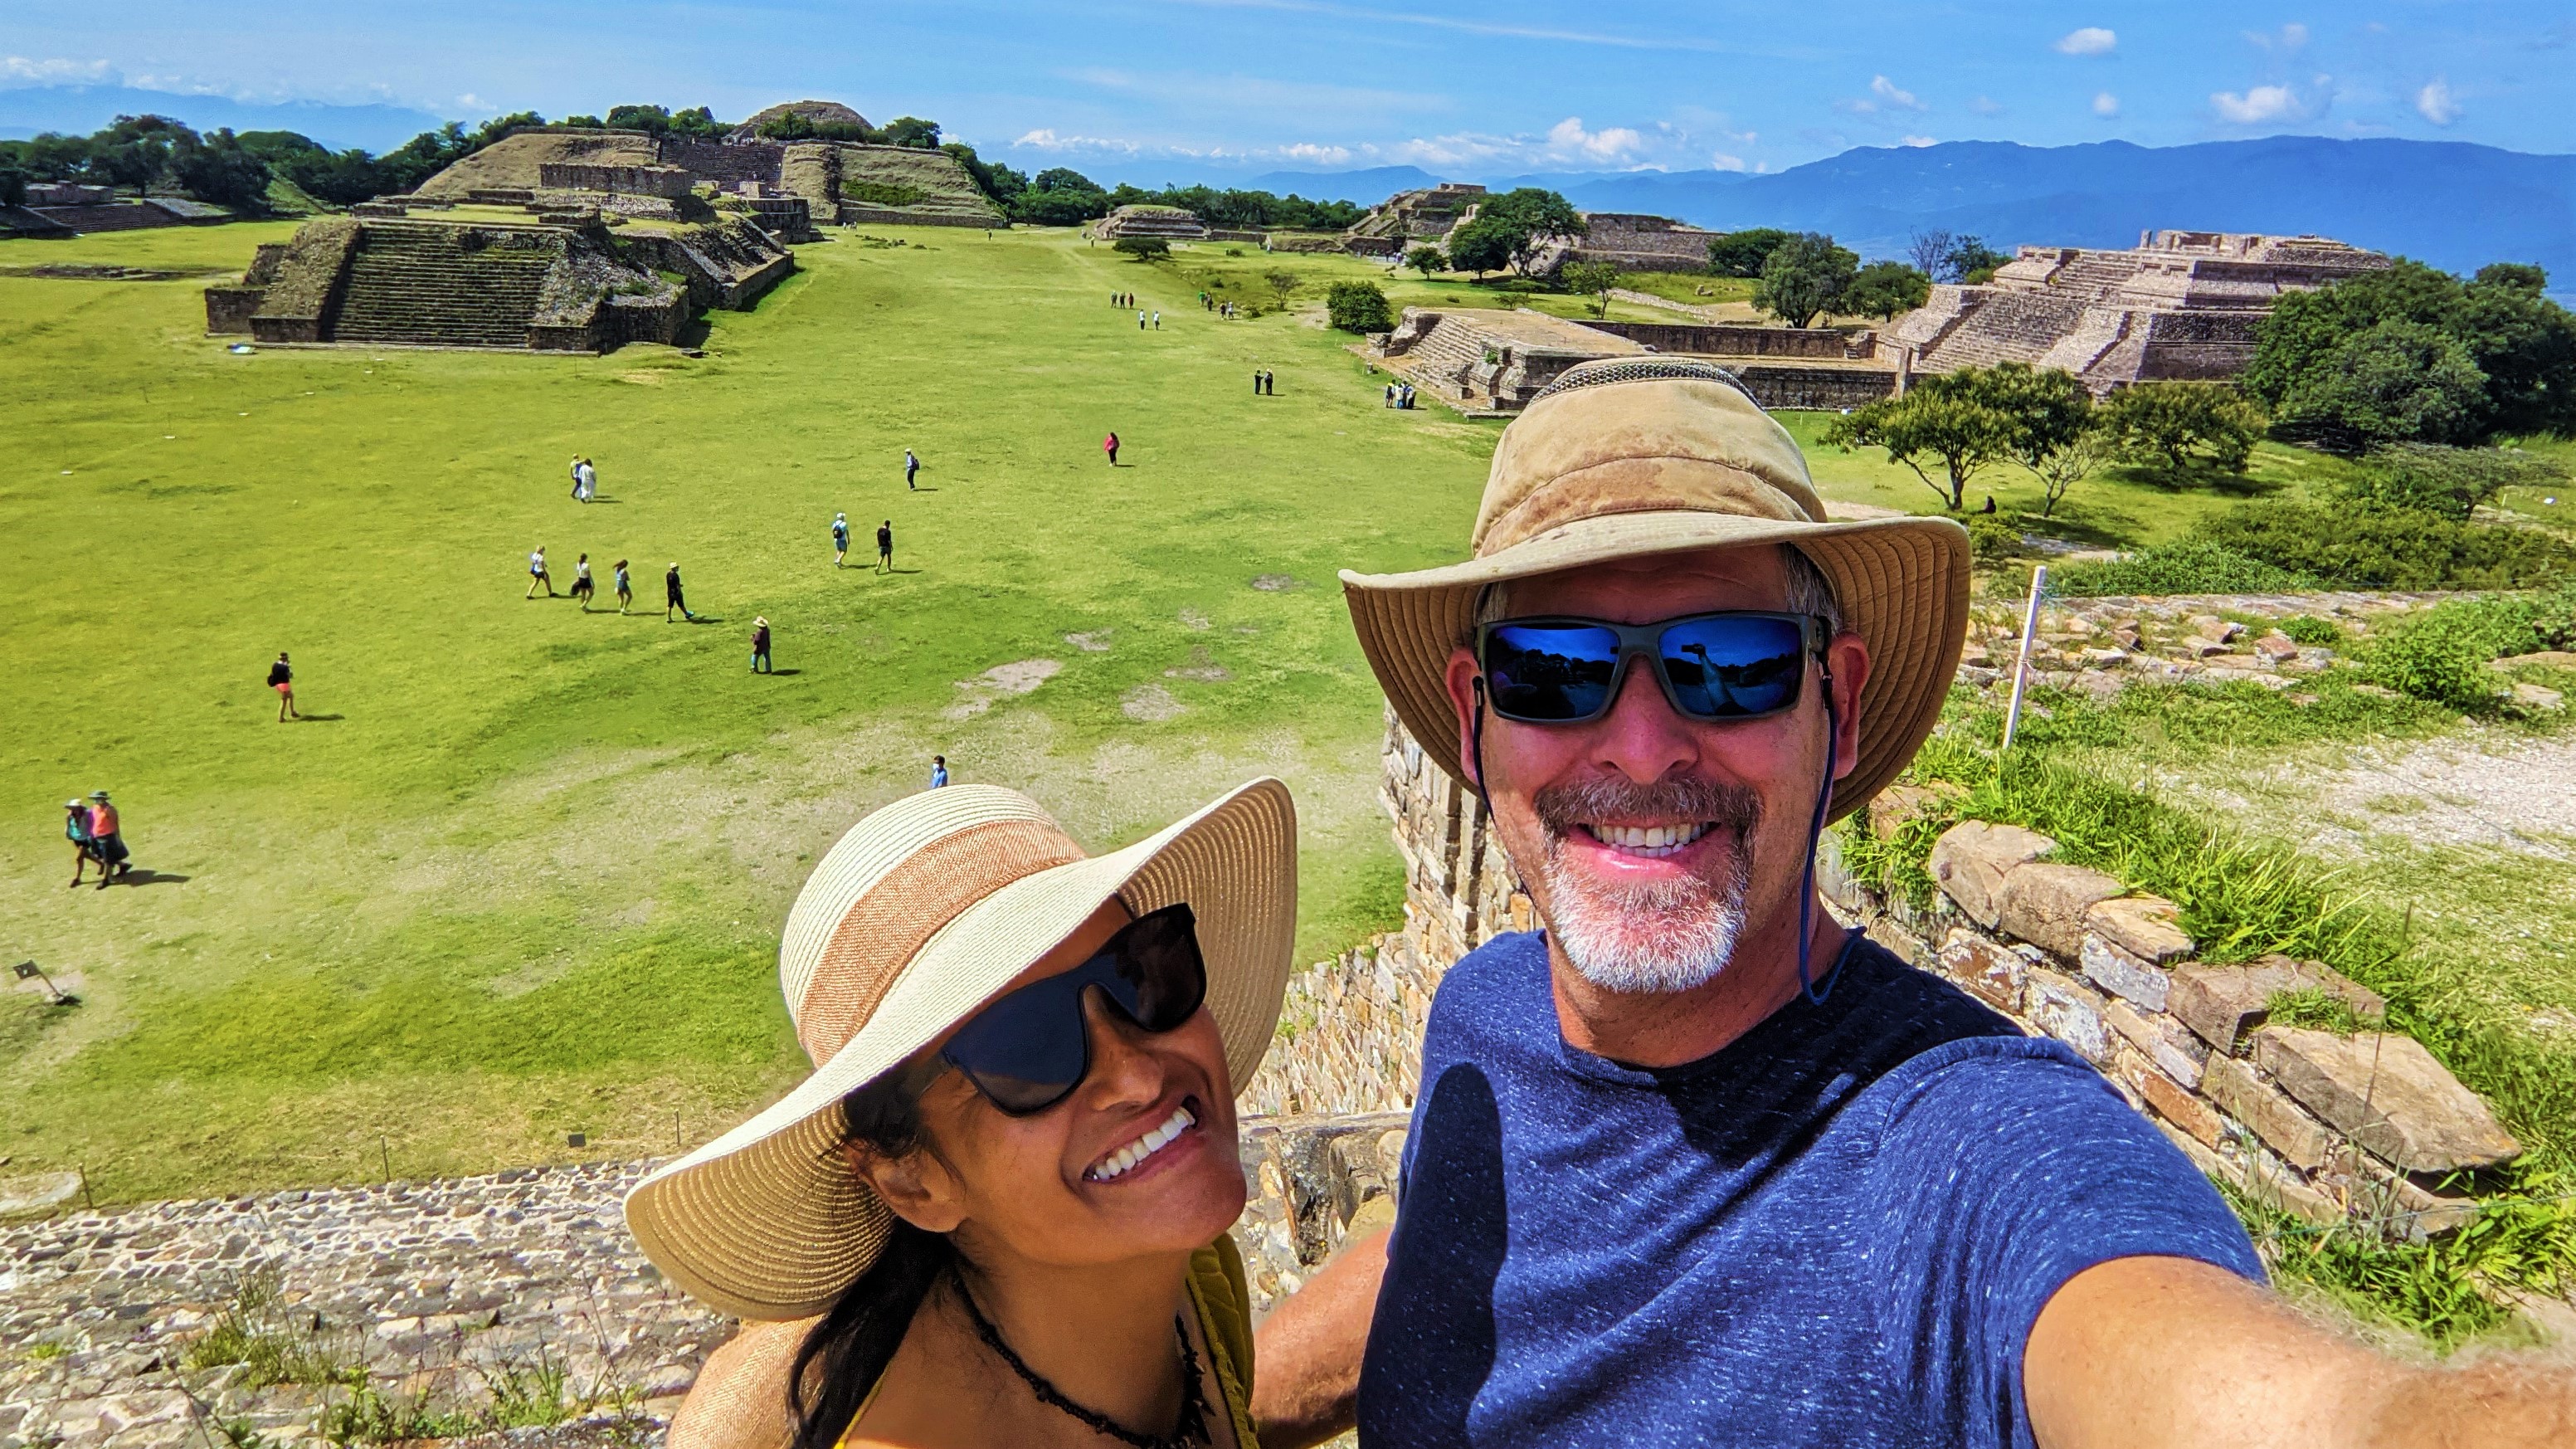 The main square of Monte Alban was jaw dropping!!!!!!